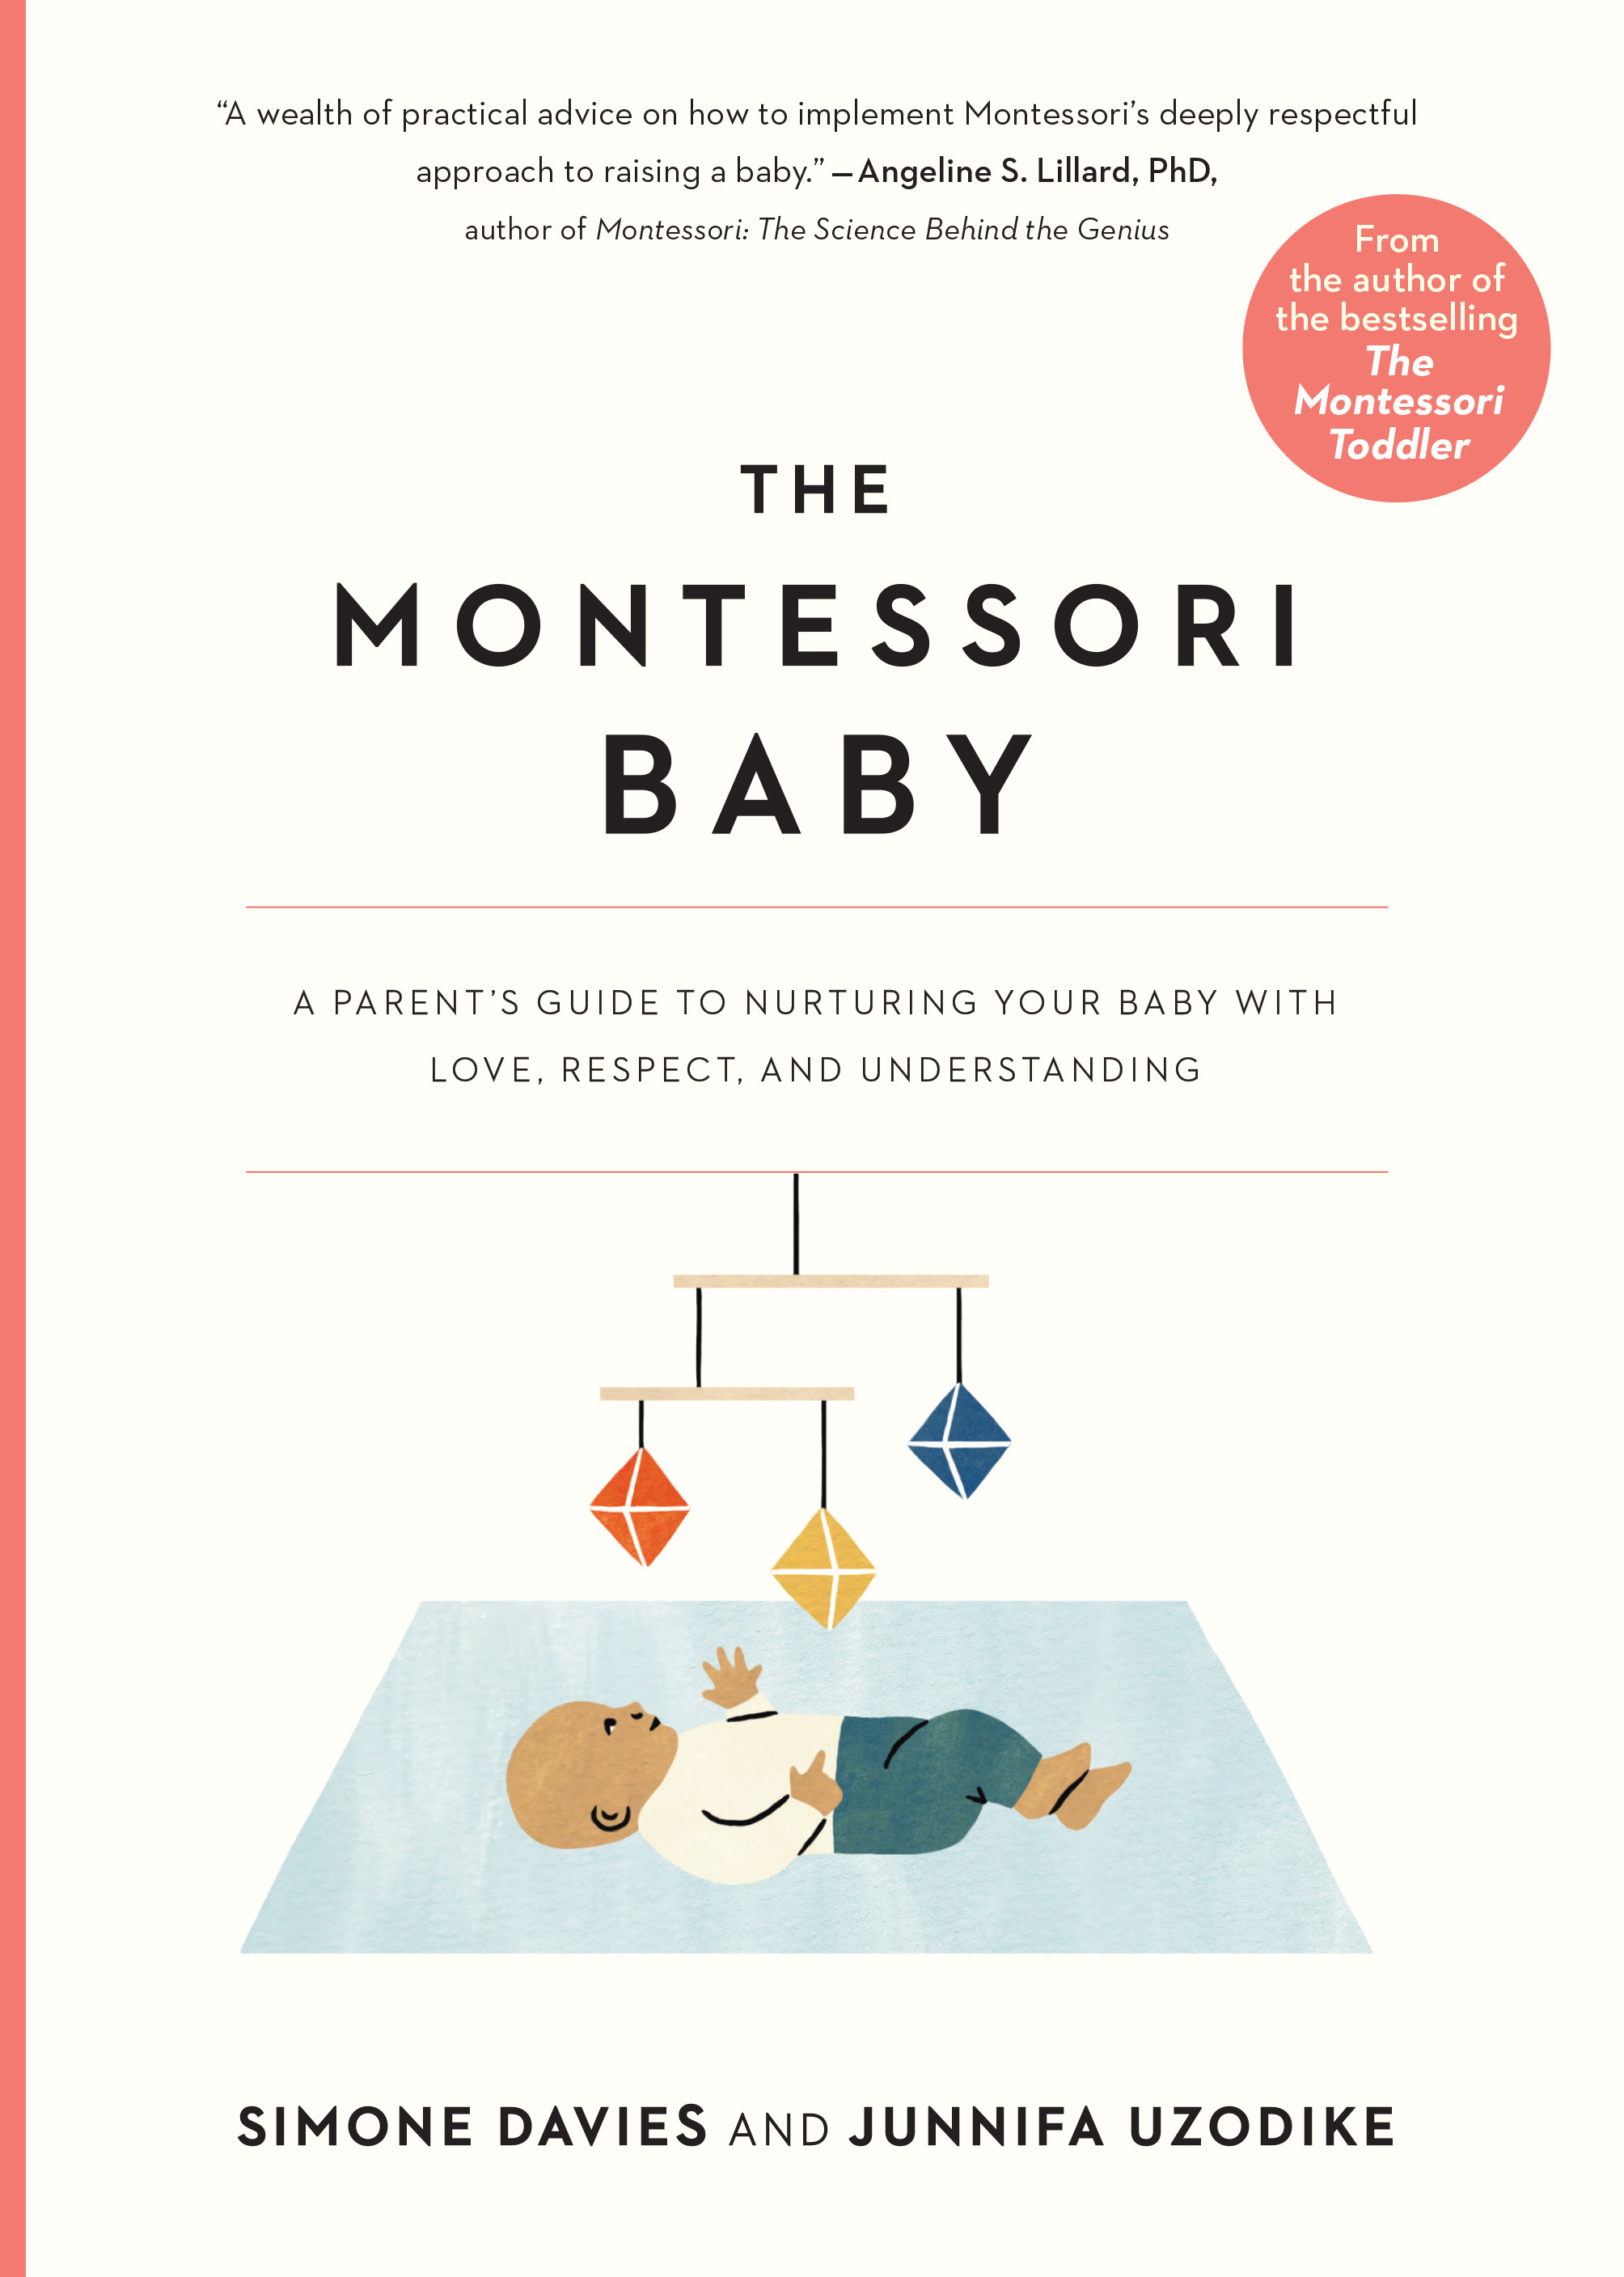 The Montessori Baby: A Parent's Guide to Nurturing Your Baby with Love, Respect, and Understanding PDF